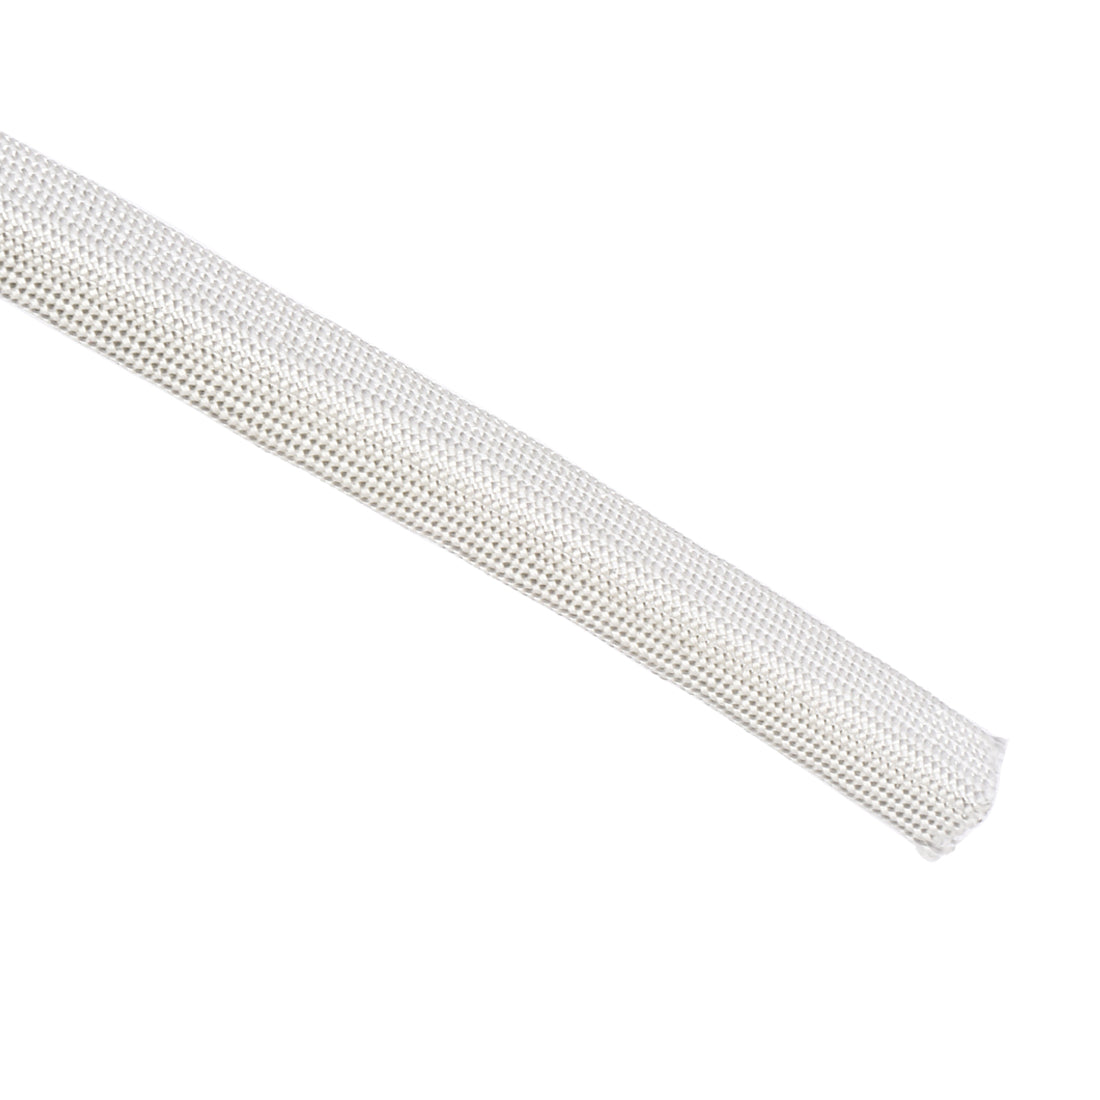 uxcell Uxcell Insulation Cable Protector, 3.3Ft-10mm High TEMP Fiberglass Sleeve White